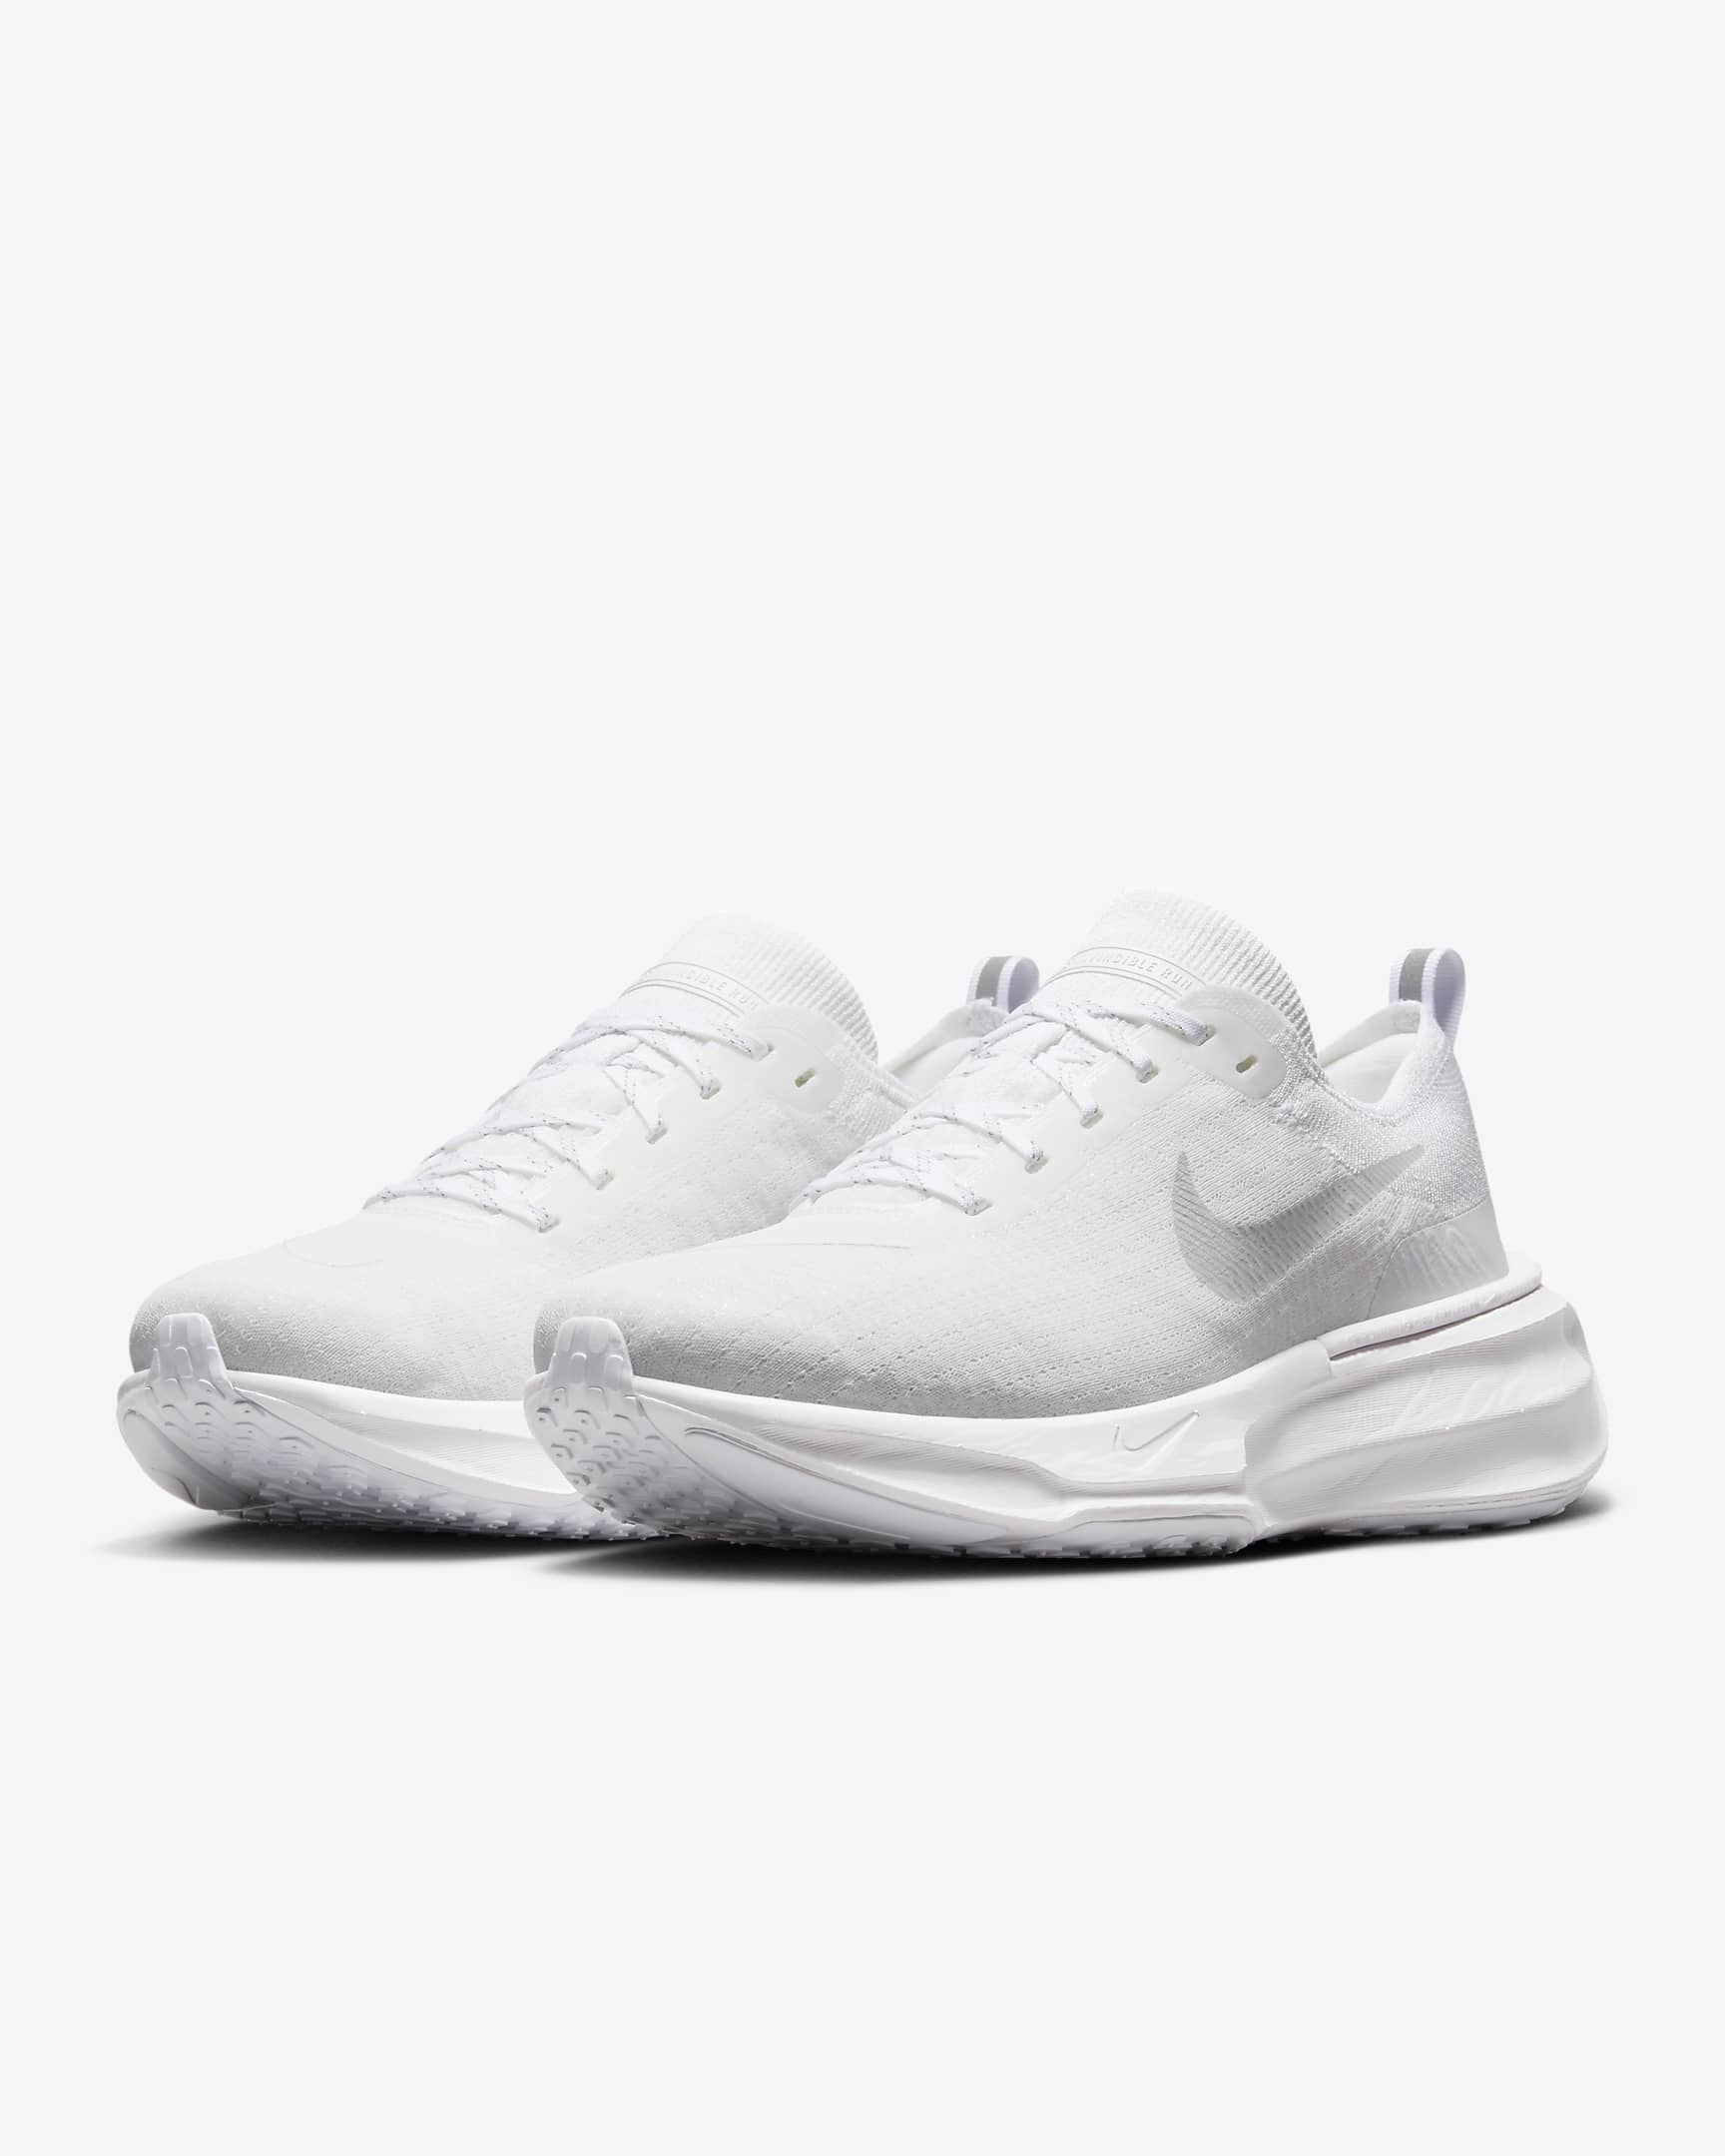 Nike Invincible 3 Men's Road Running Shoes (Extra Wide) - White/Platinum Tint/White/Photon Dust